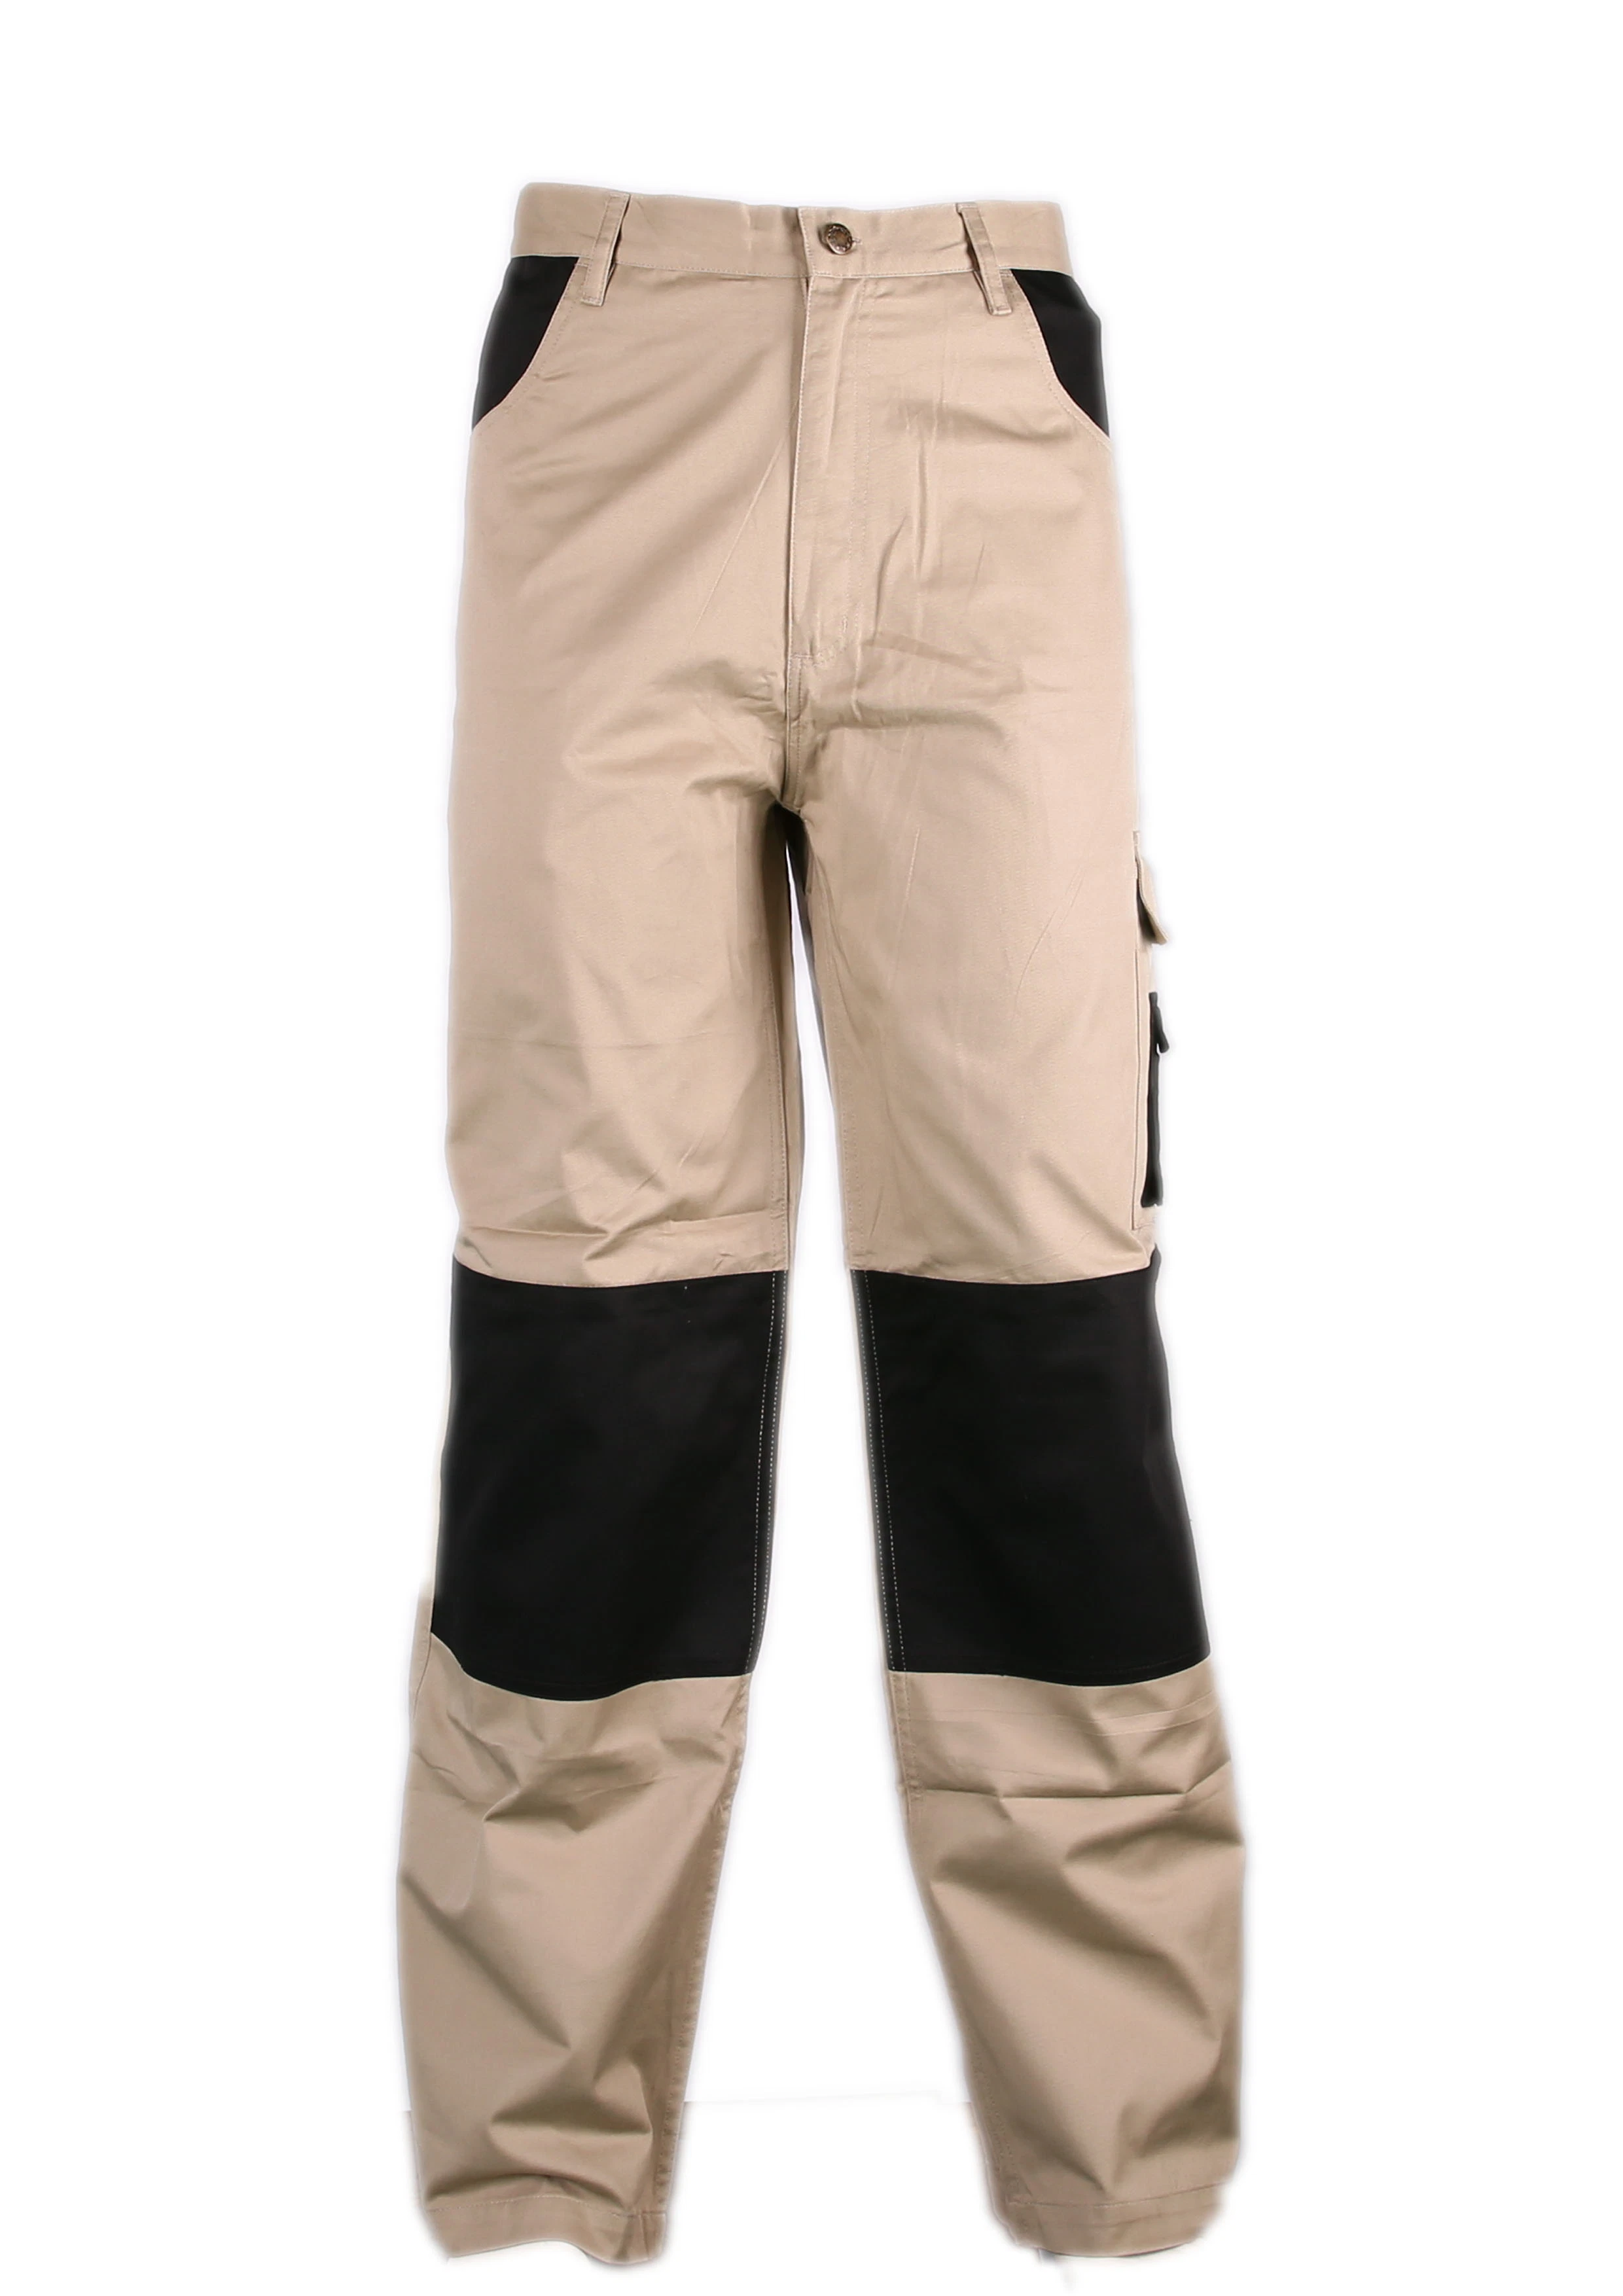 Heavy Duty Mens Cotton Work Cargo Pants with Knee Pad